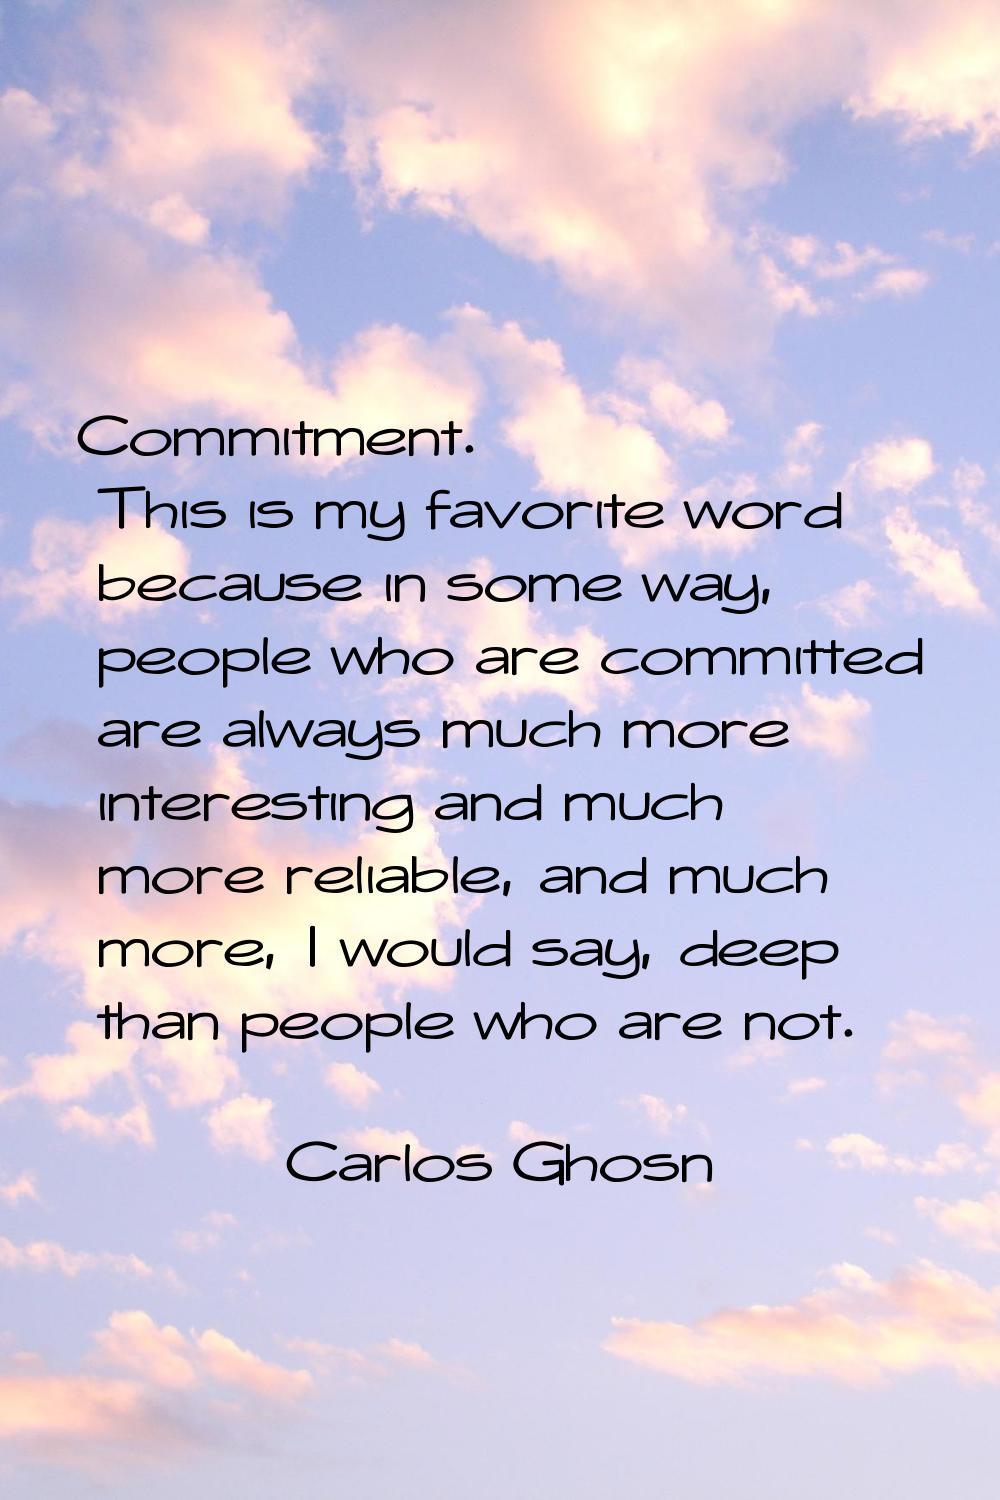 Commitment. This is my favorite word because in some way, people who are committed are always much 